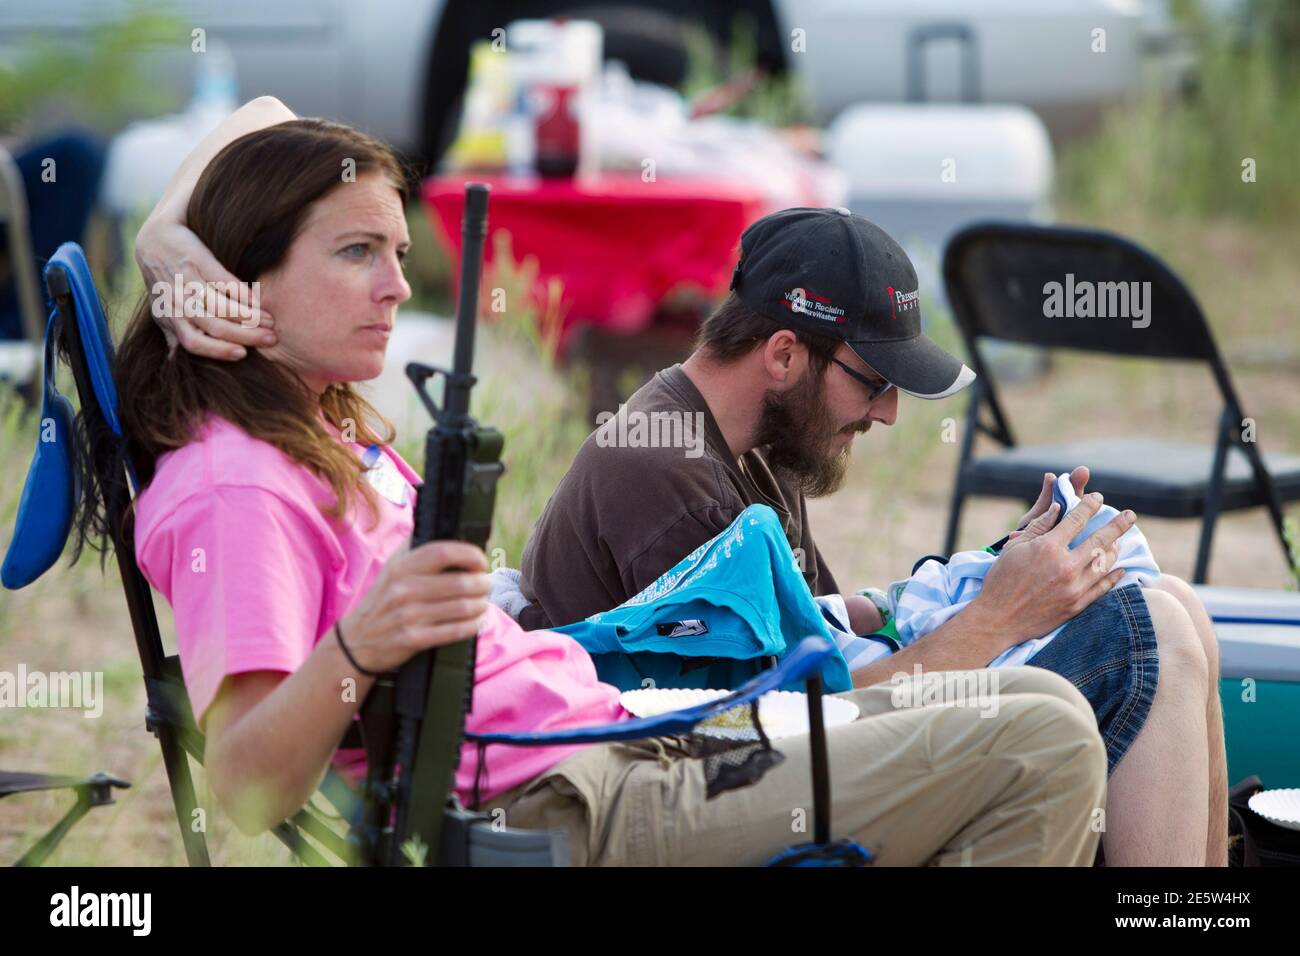 Bundys High Resolution Stock Photography and Images - Alamy